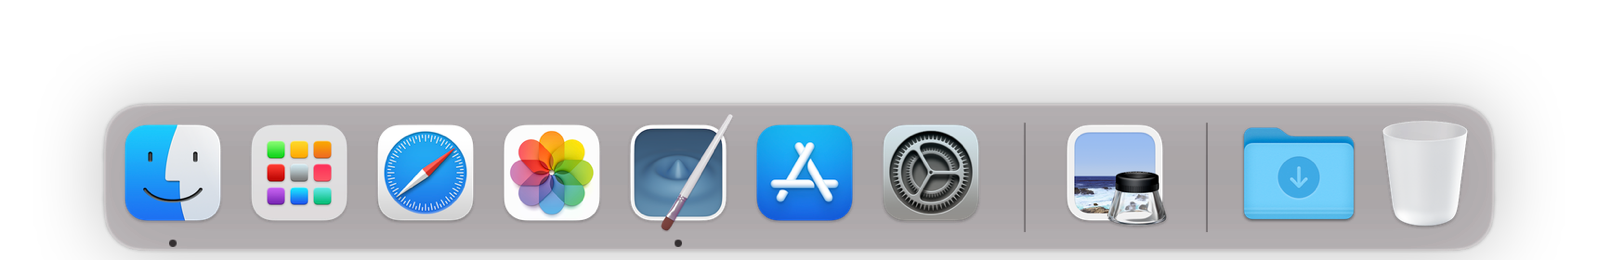 macOS Dock with the Diffraction application shown running.